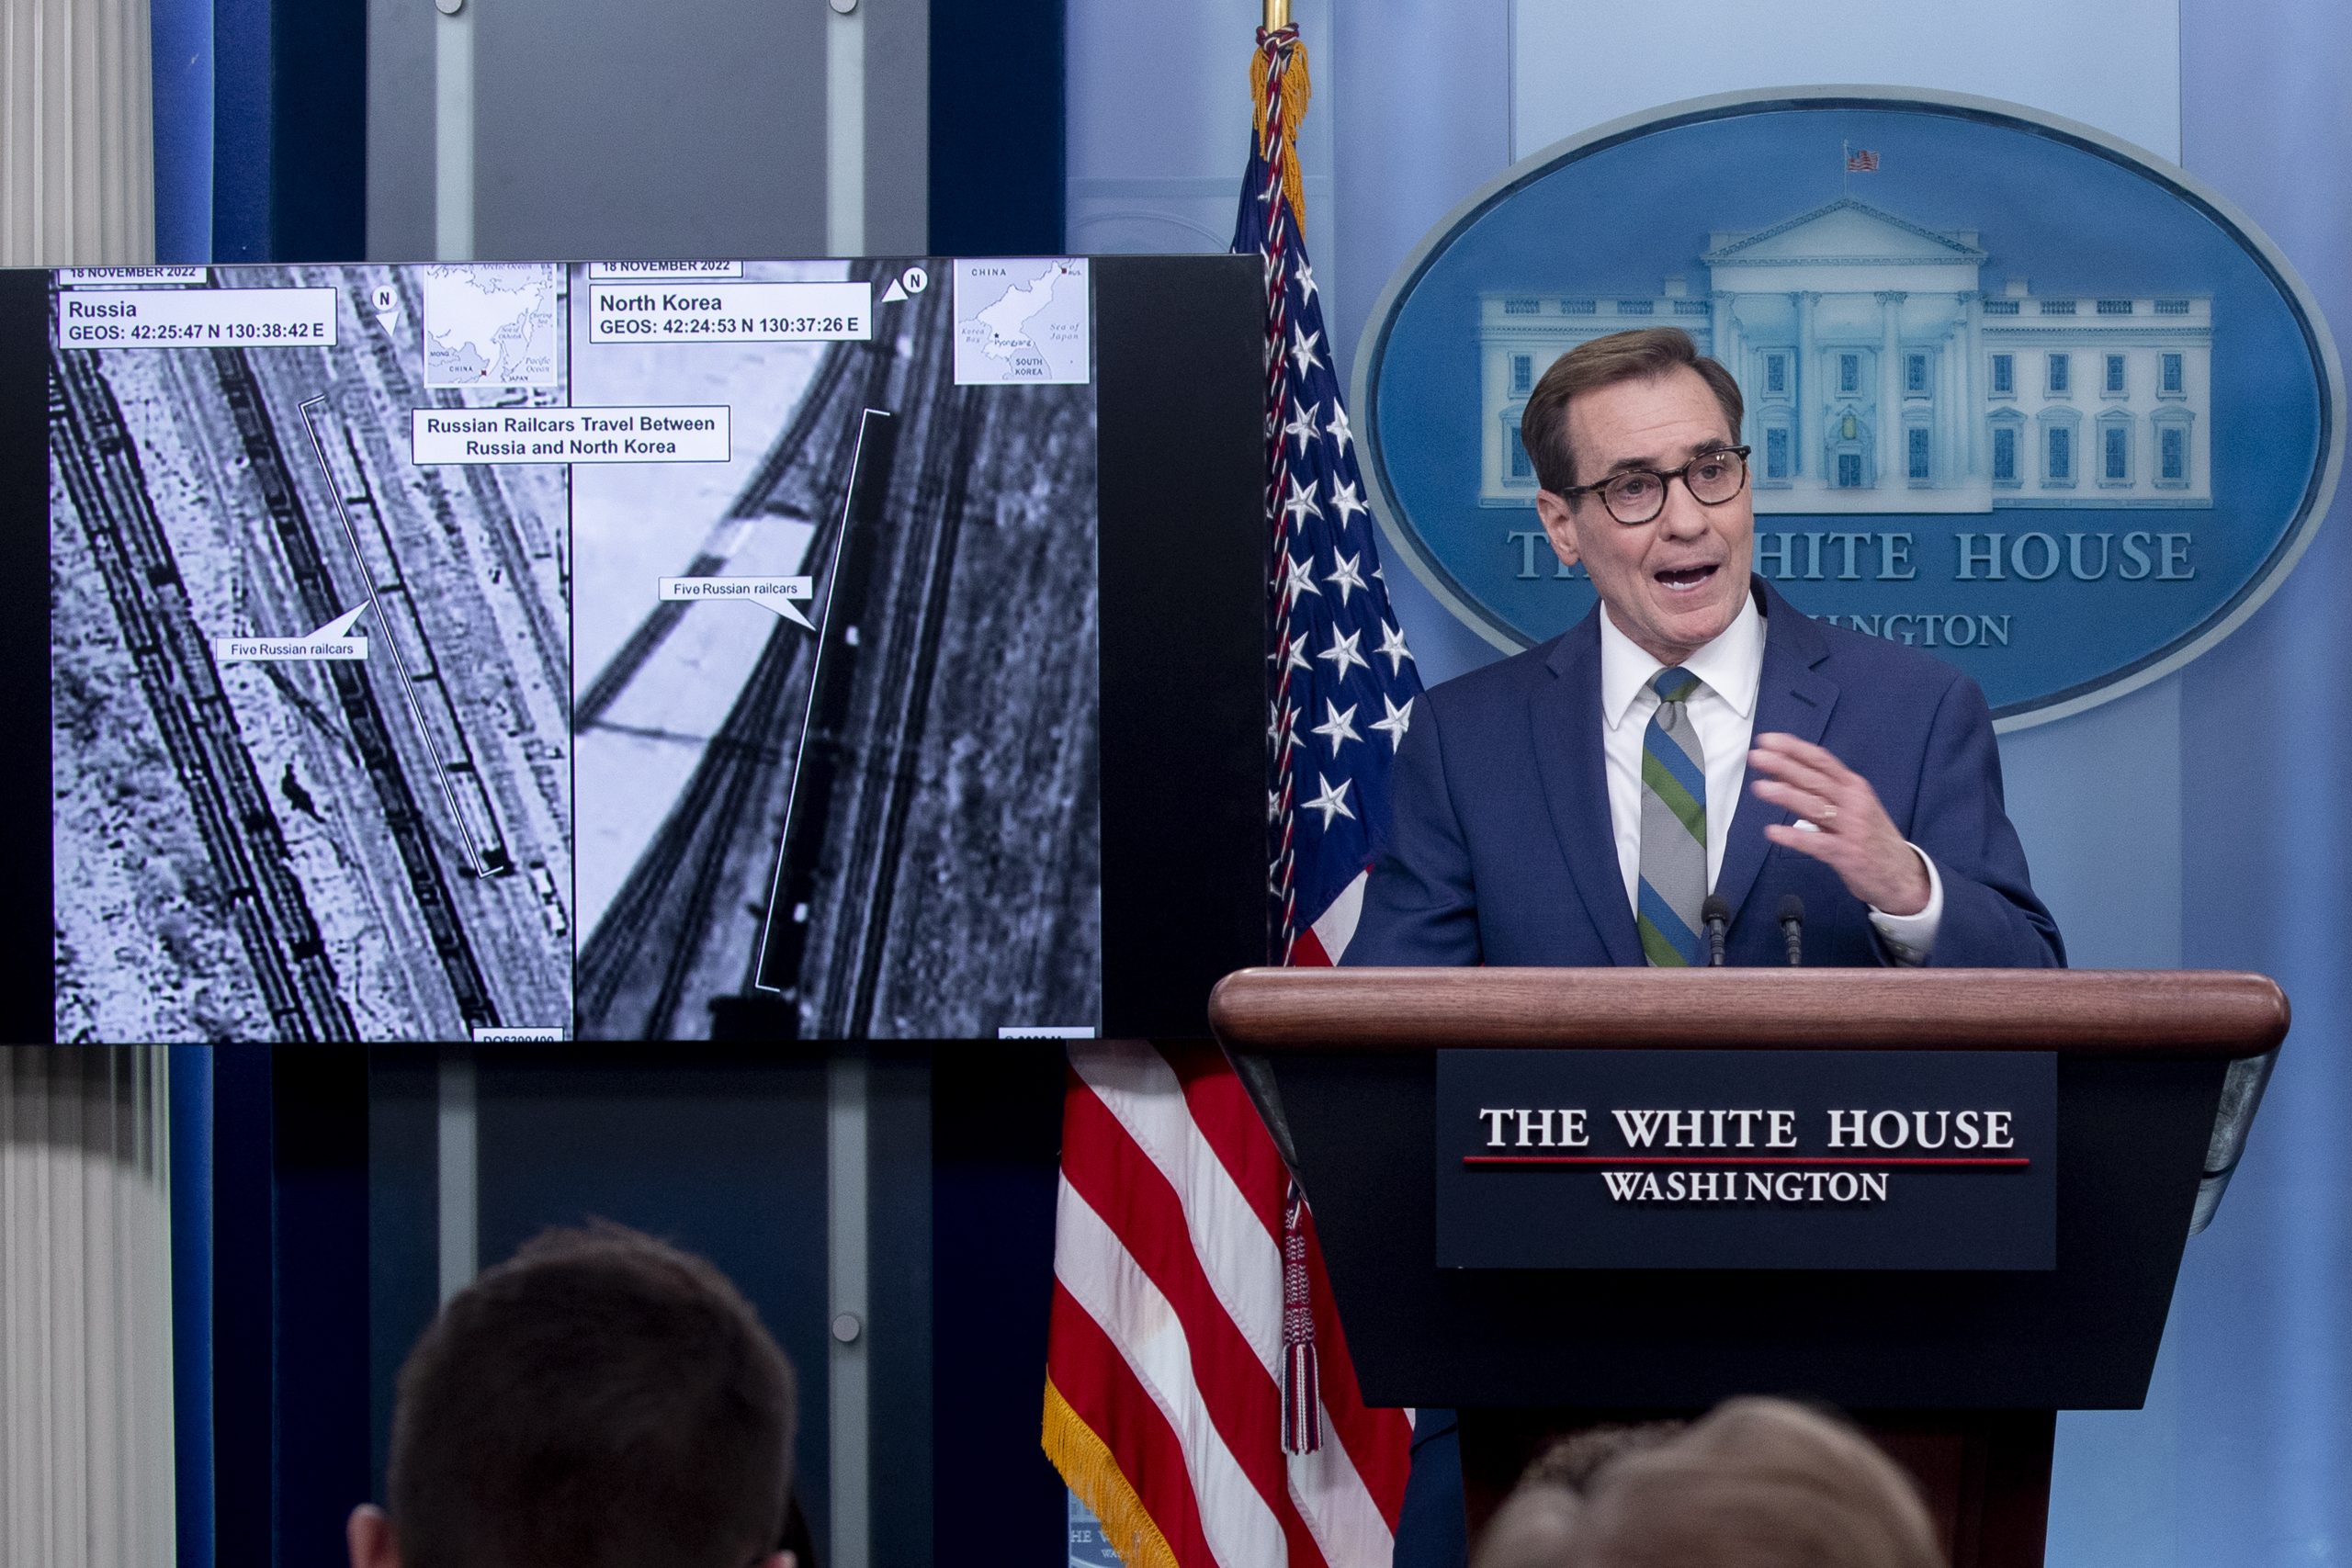 epa10418784 Coordinator for Strategic Communications at the National Security Council in the White House John Kirby speaks beside monitors depicting images that the White House says show North Korean arms being transported by Russian railcars, during a news briefing in the James Brady Press Briefing Room of the White House in Washington, DC, USA, 20 January 2023. The United States will impose new sanctions against Russian private military company, Wagner Group; and will declare it a 'Transnational Criminal Organization' for aiding Russia's effort in the war in Ukraine.  EPA/MICHAEL REYNOLDS